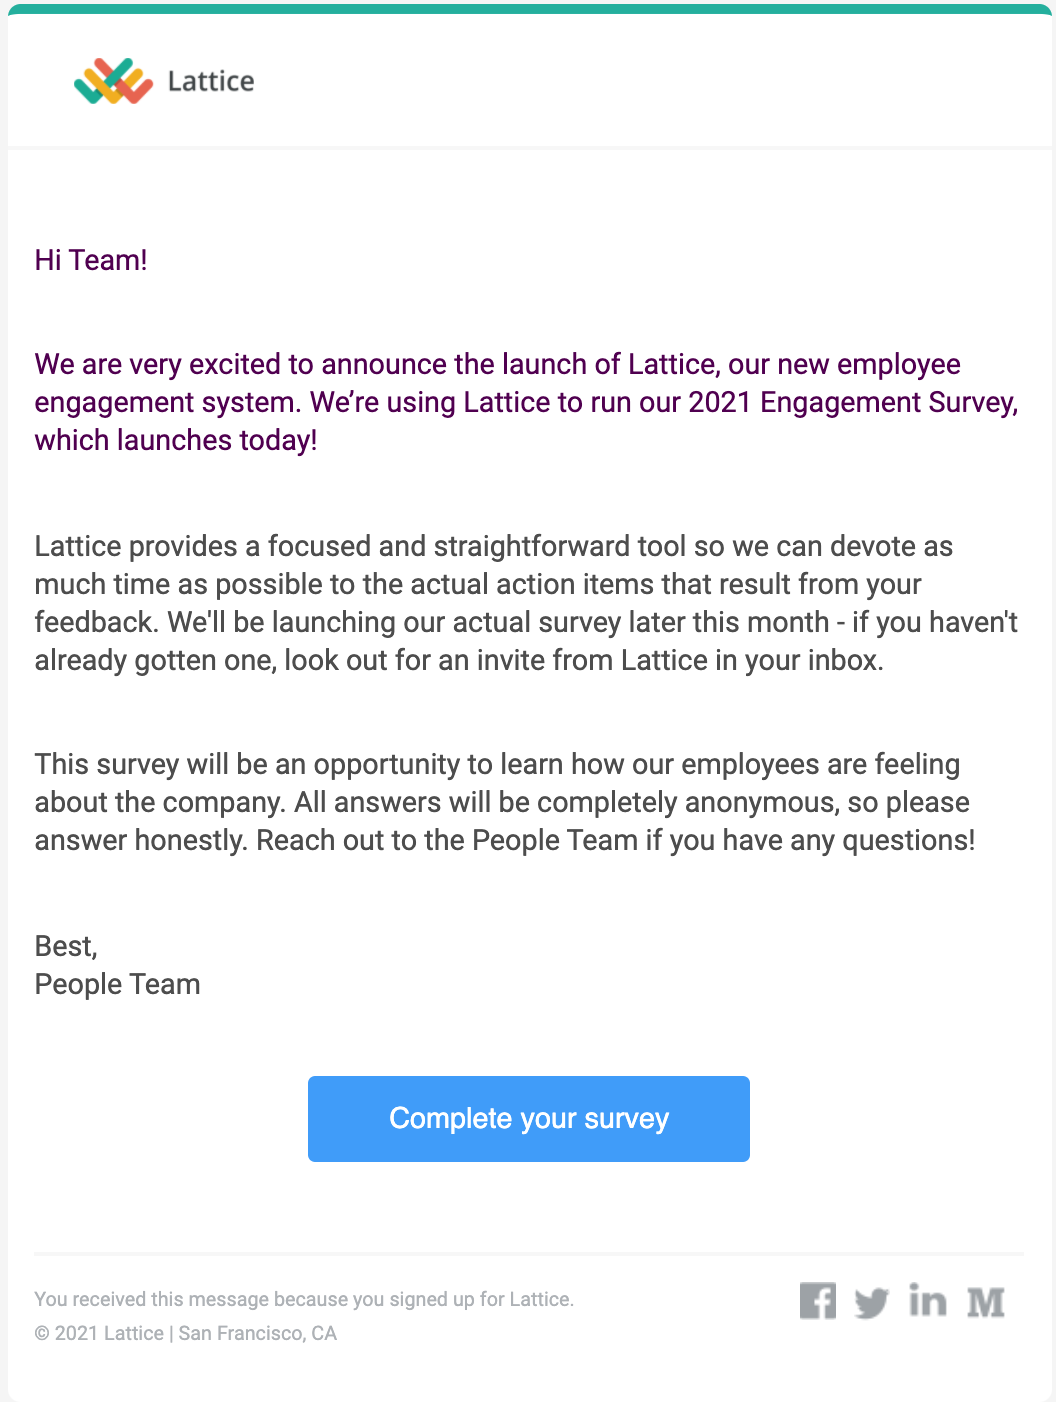 Image of an example Lattice launch email. The email contains the Lattice logo and has a button titled Complete Your Survey